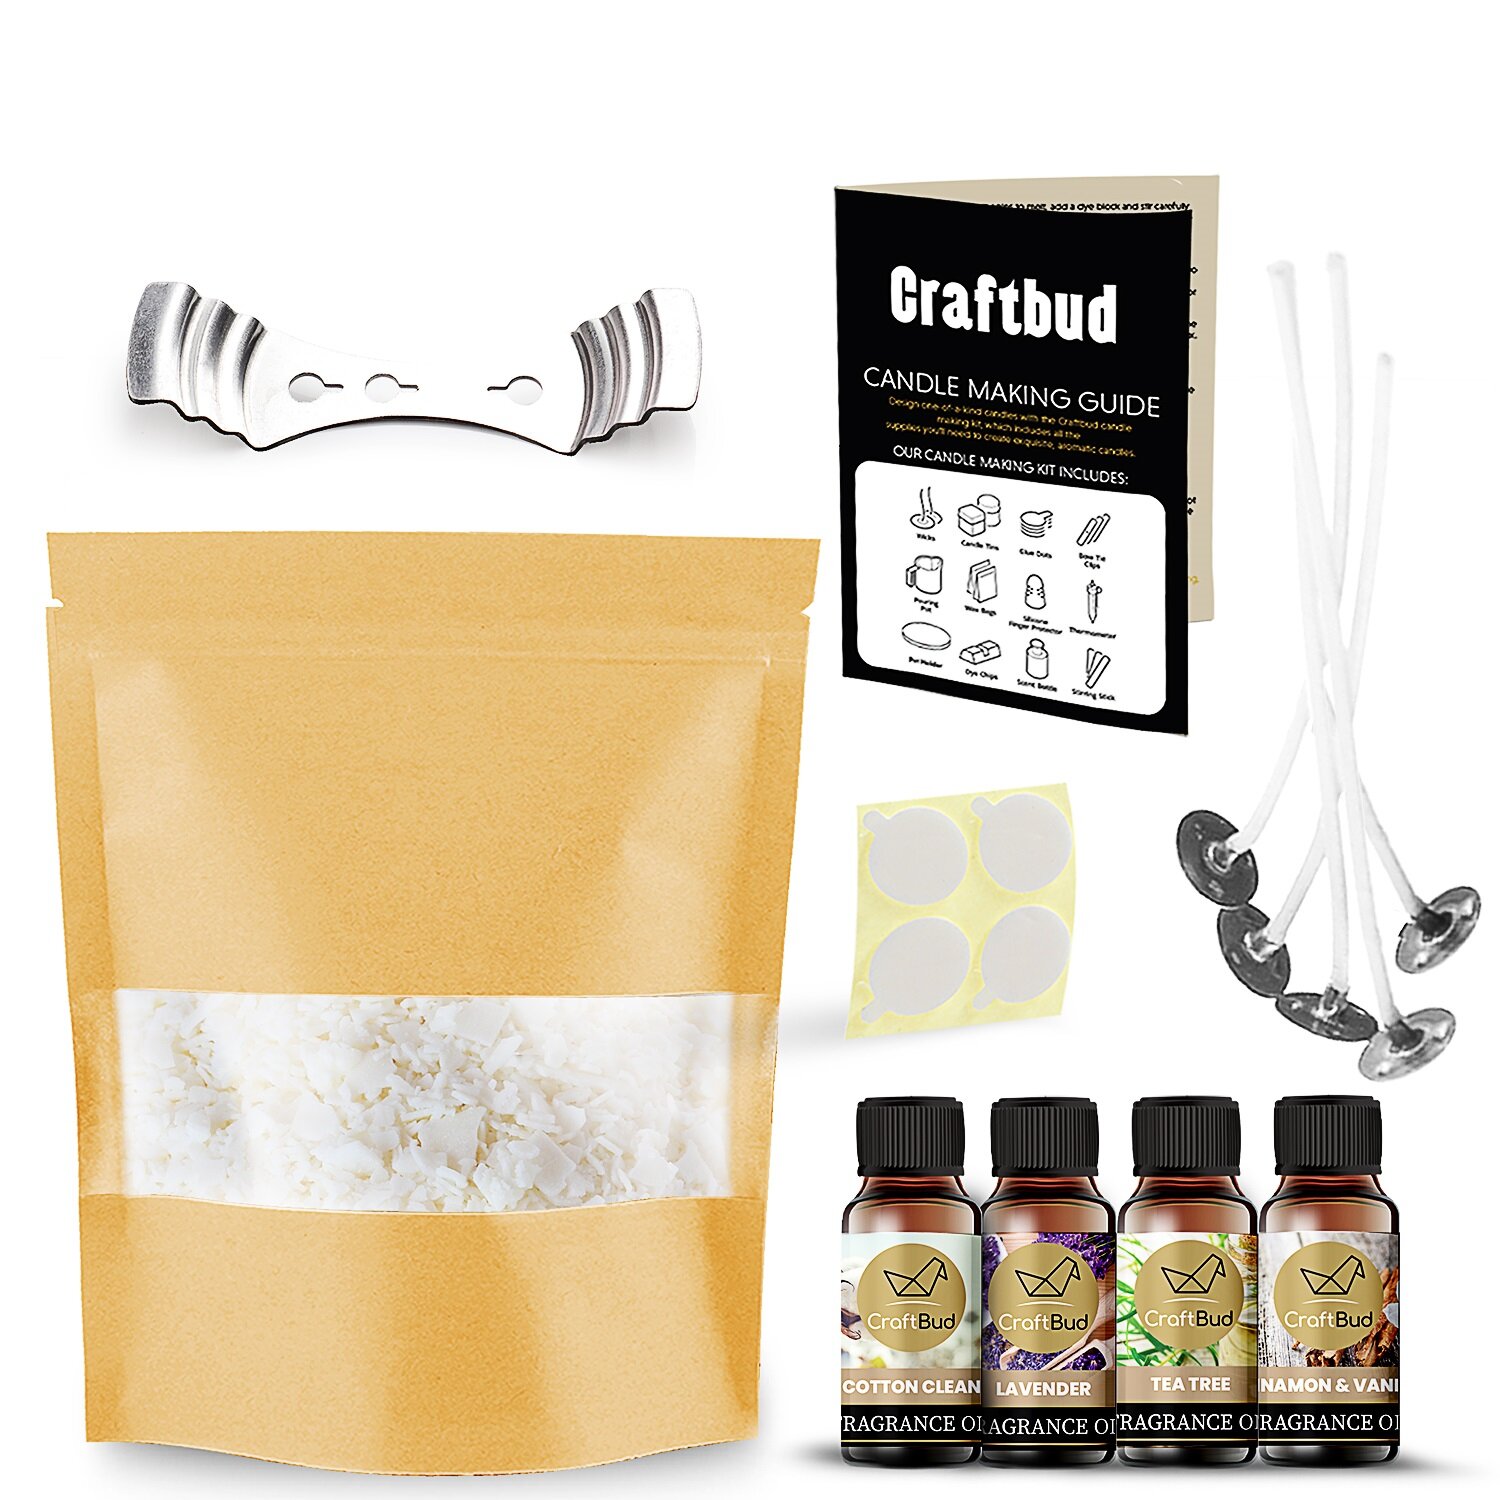 Craftbud Complete DIY Candle Making Kit Supplies for Adults and